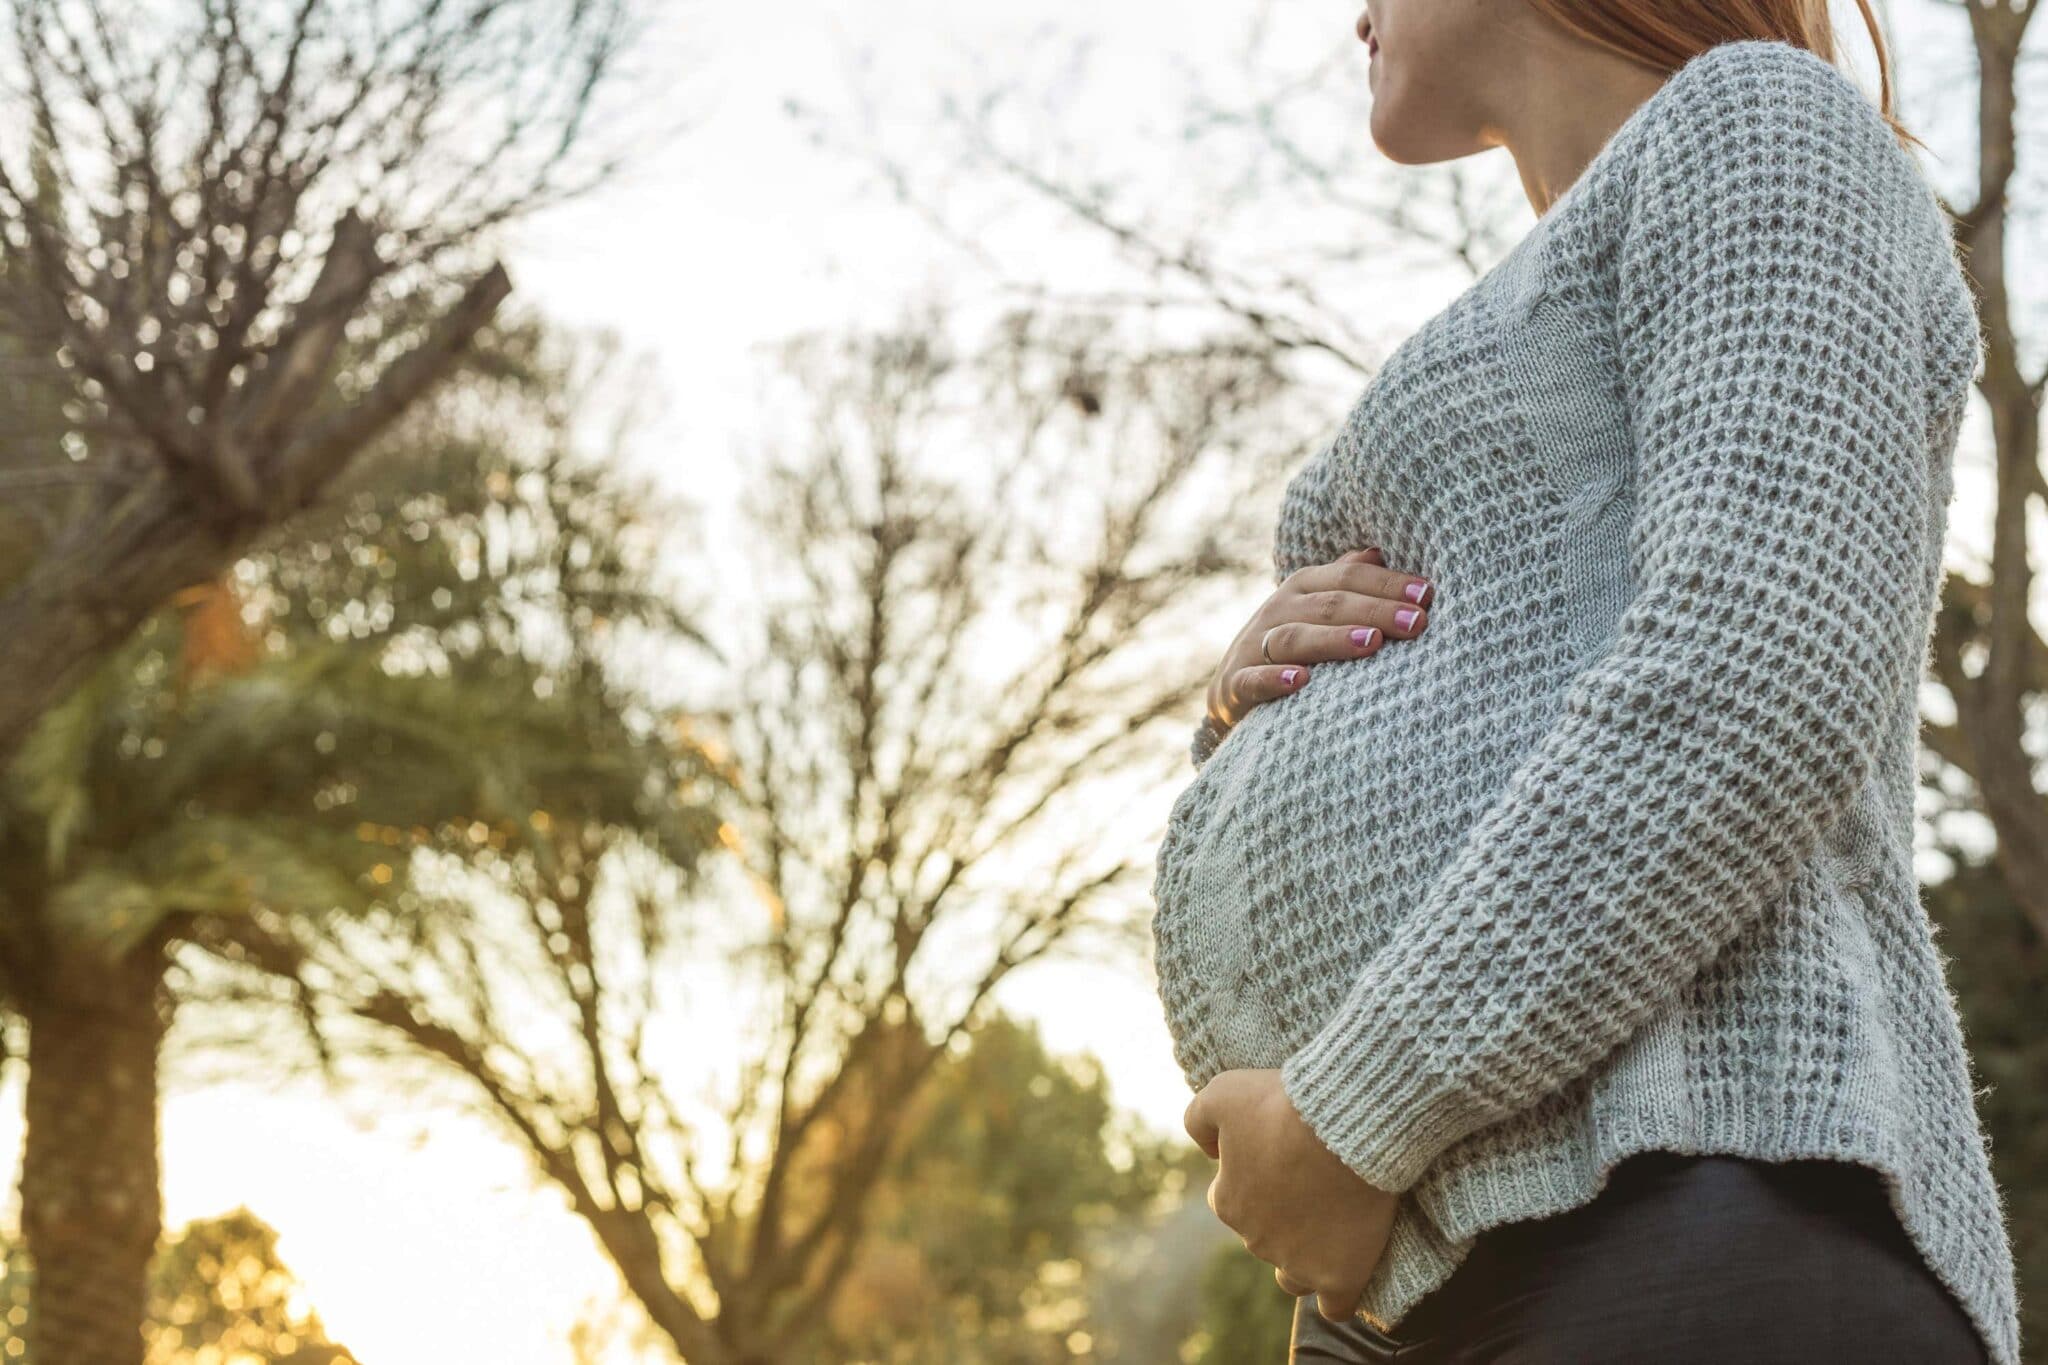 Facts About Covid-19 Vaccines That Pregnant Women Need To Know